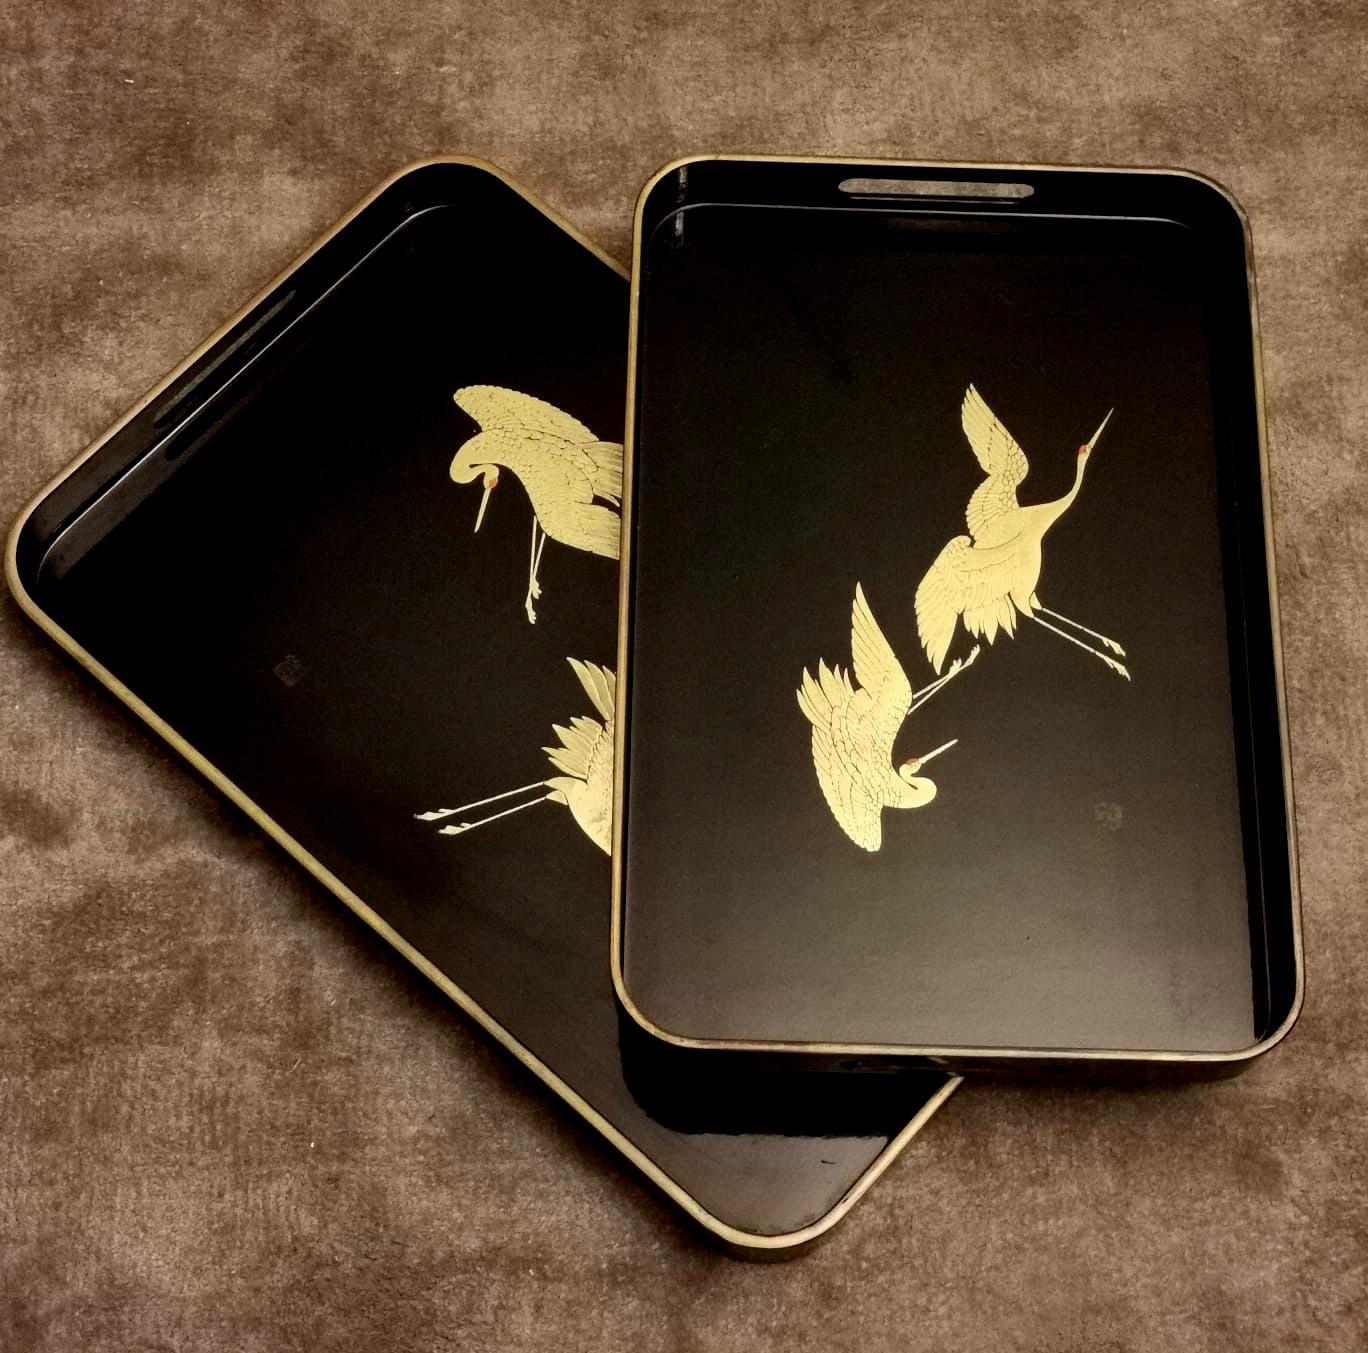 Japonisme Pair of Japanese Trays in Black Resin Lacquer Effect with Gold Painted Cranes